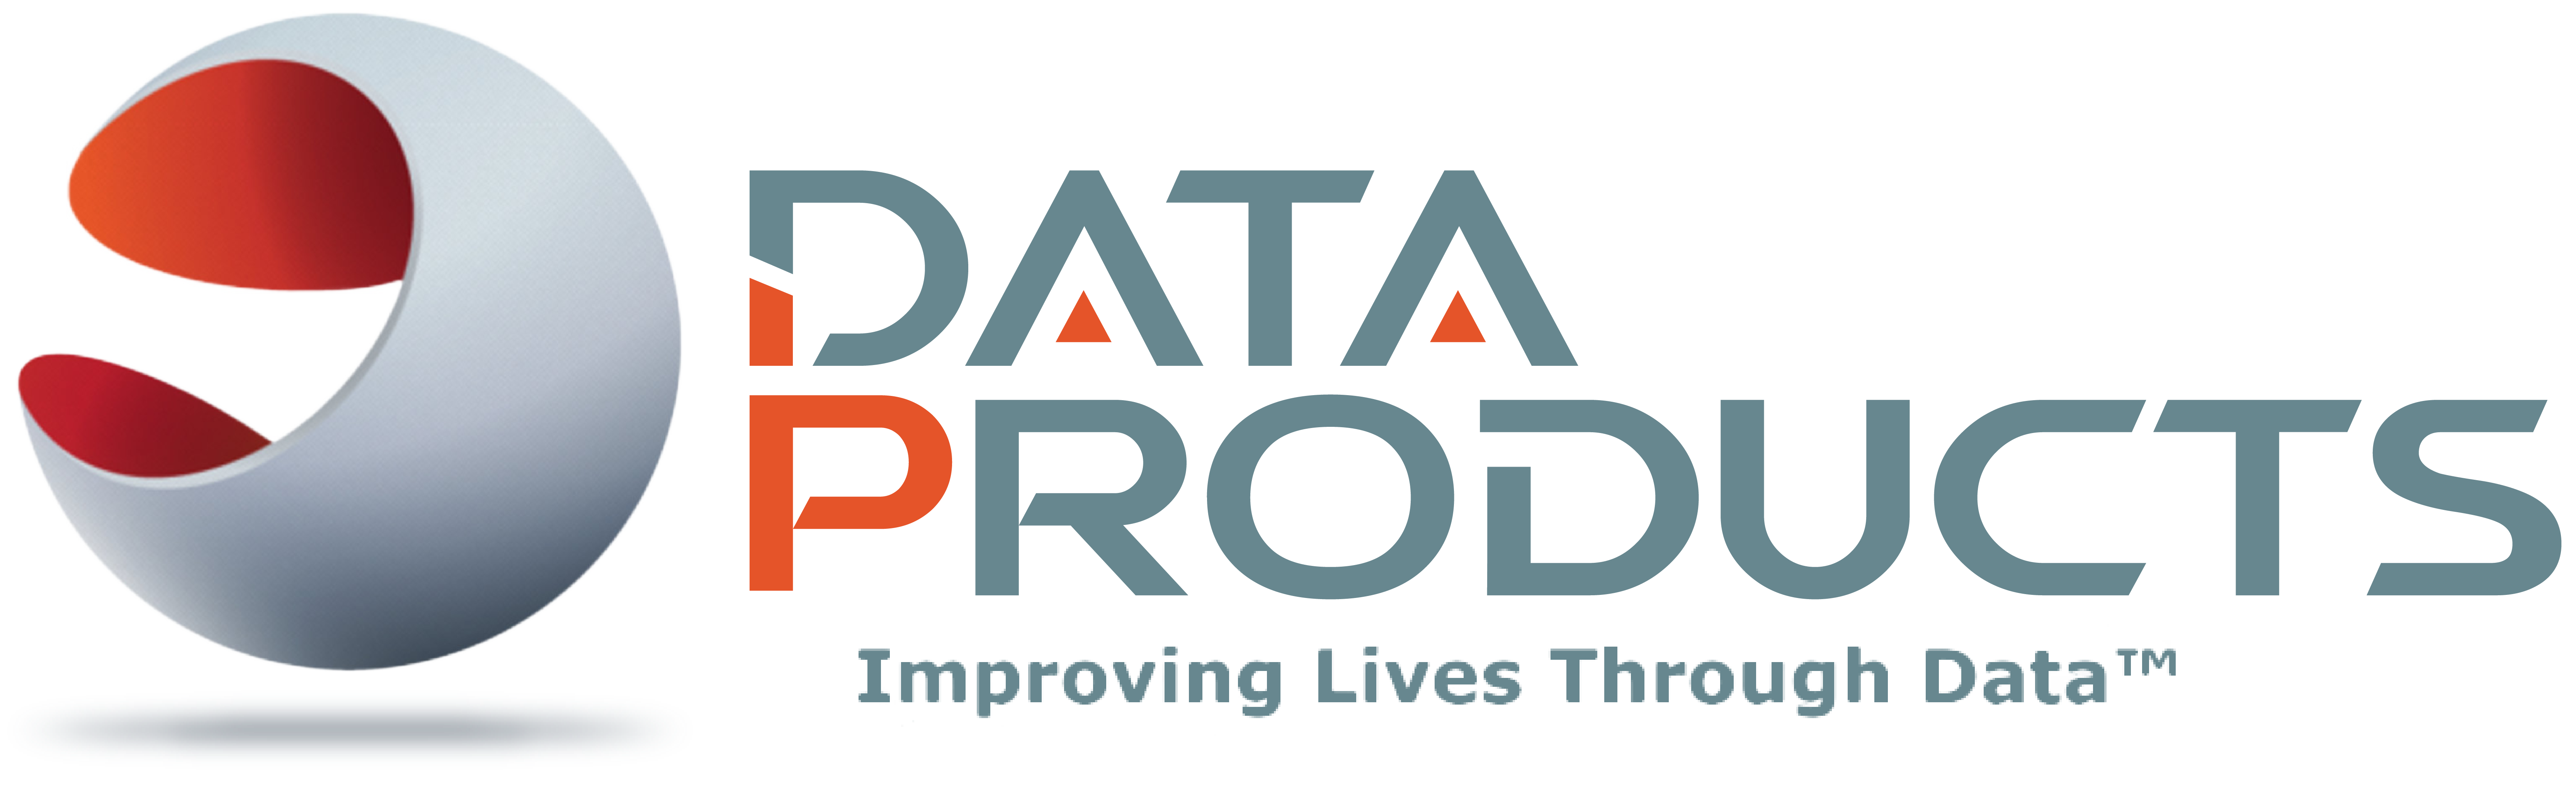 data-products-logo